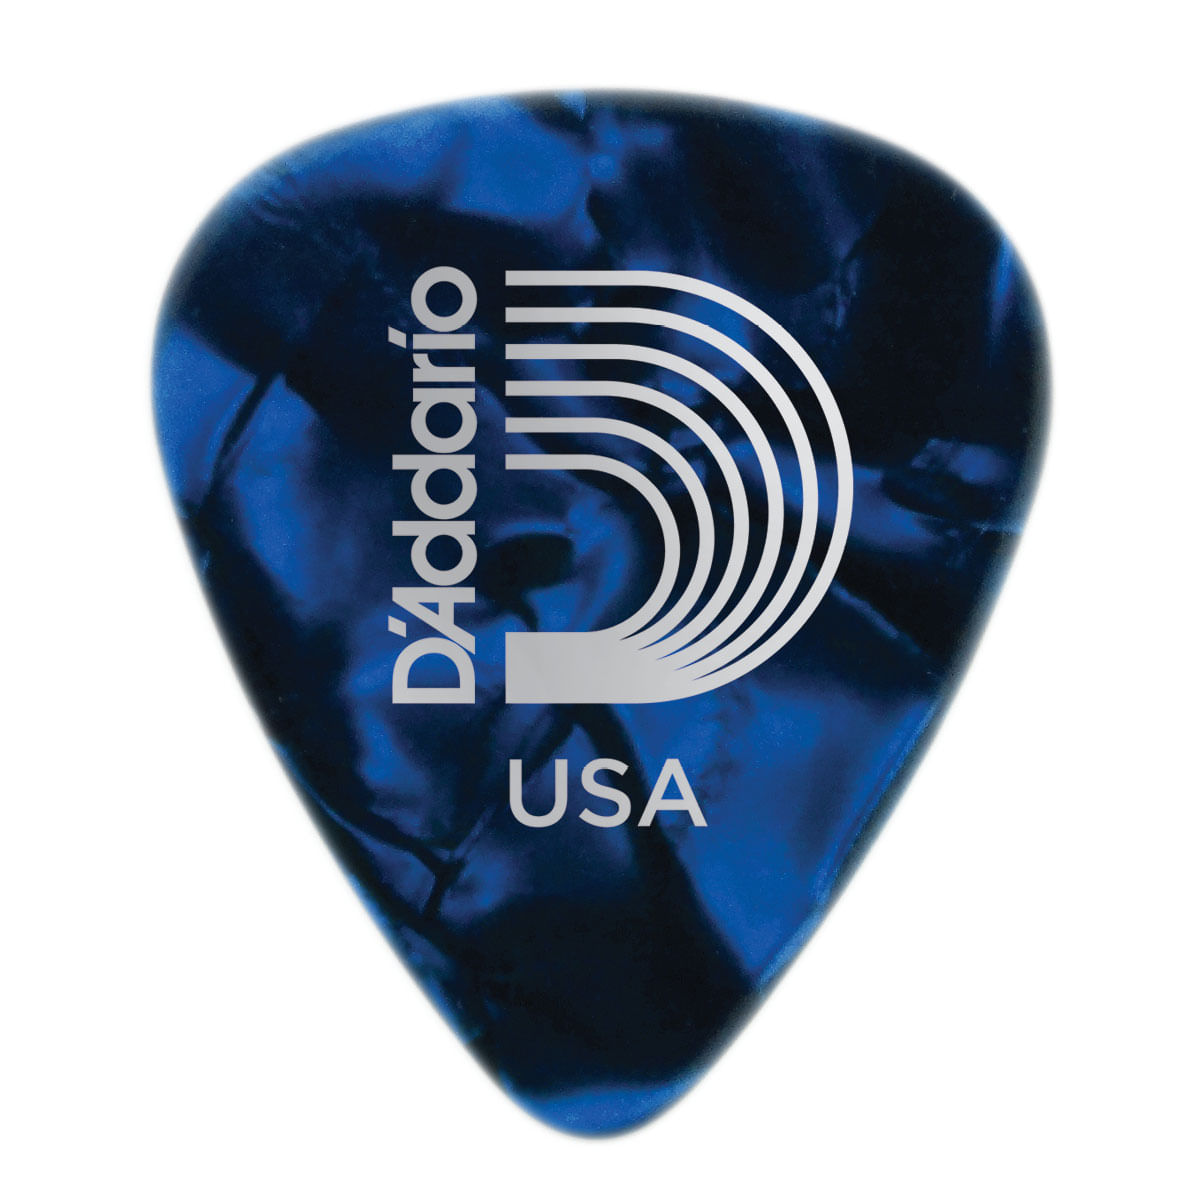 Planet Waves 1CBUP2-25 Blue Pearl Celluloid Guitar Picks - 25 pack